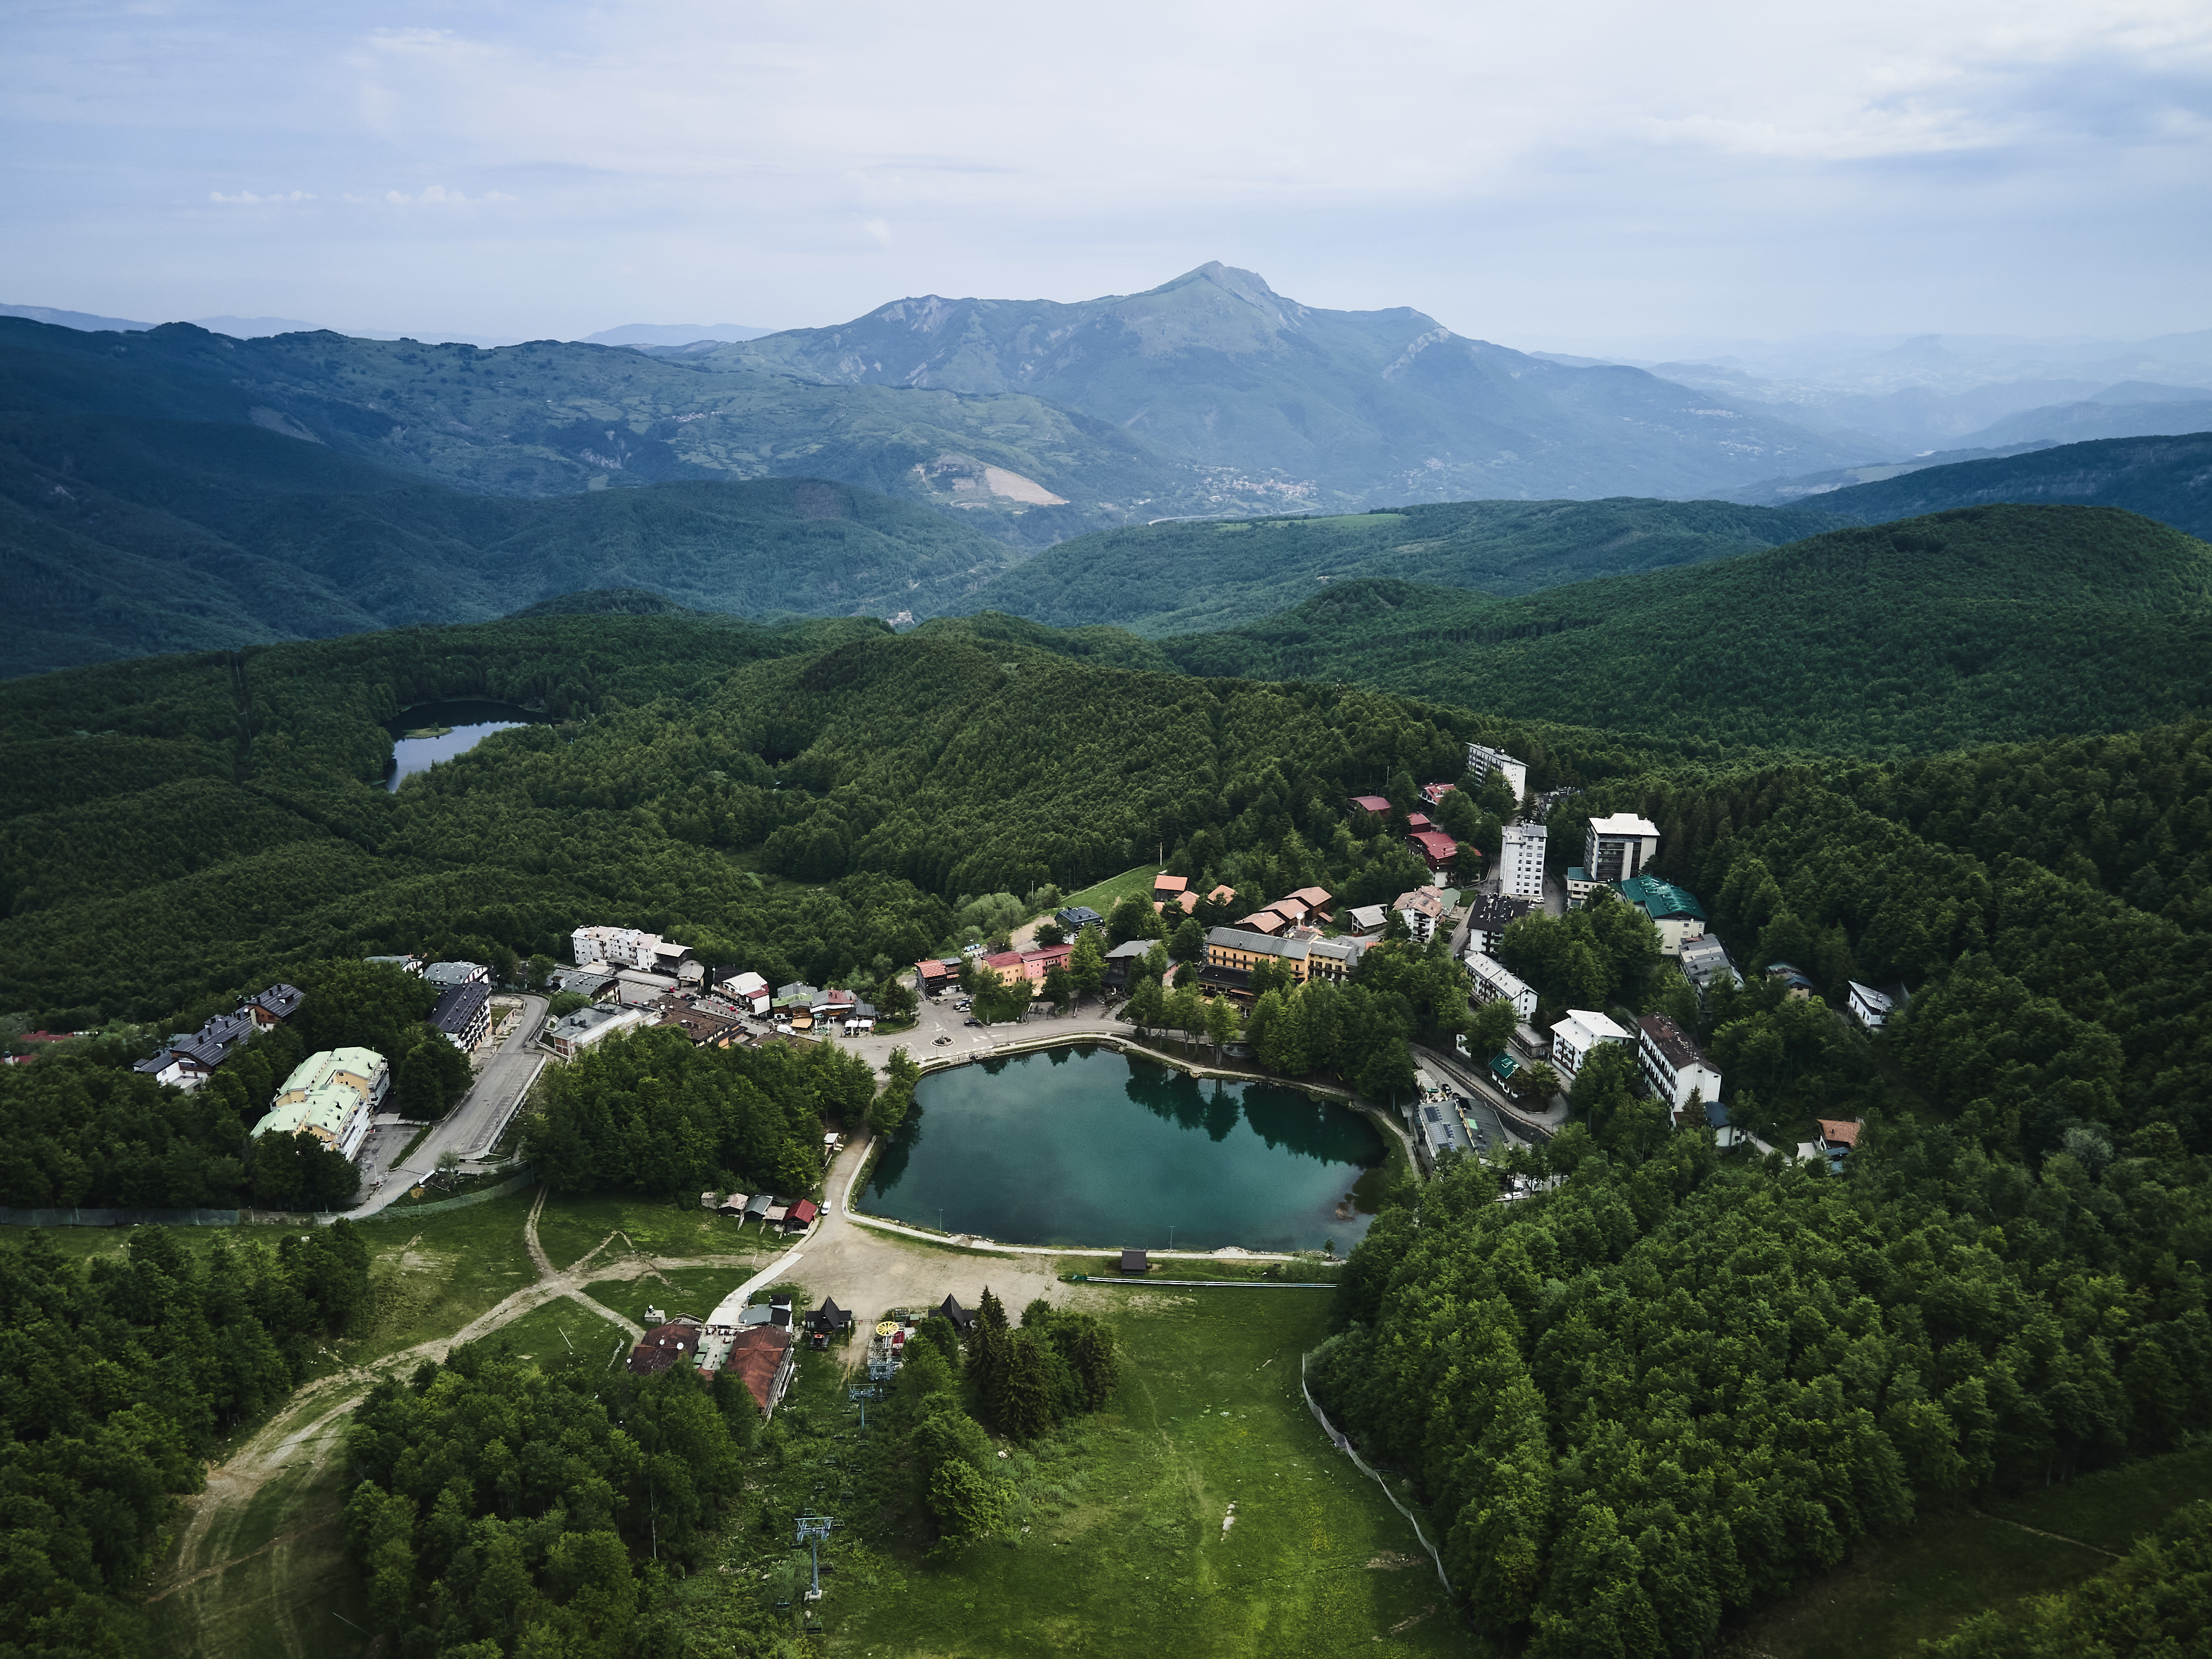 Outdoor-loving Cerreto Laghi welcomes Appenninica